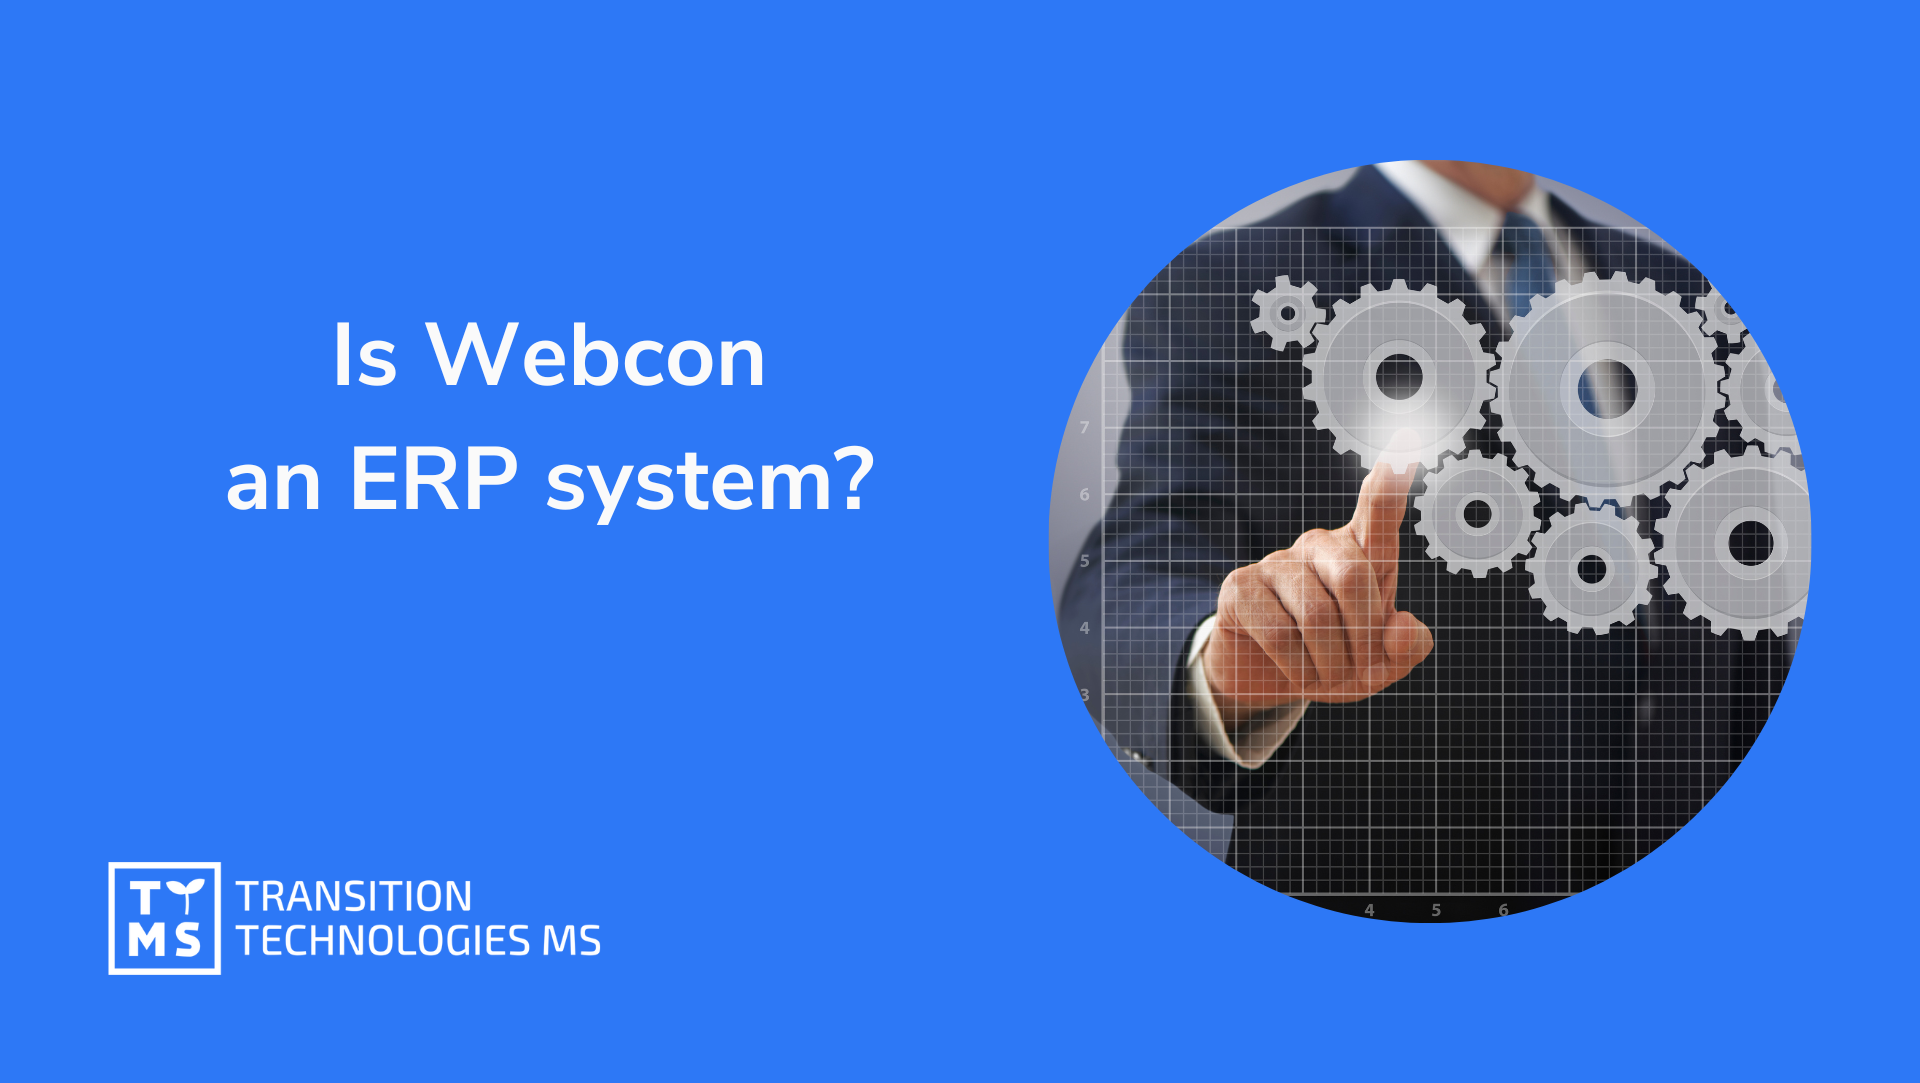 Is Webcon an ERP system?